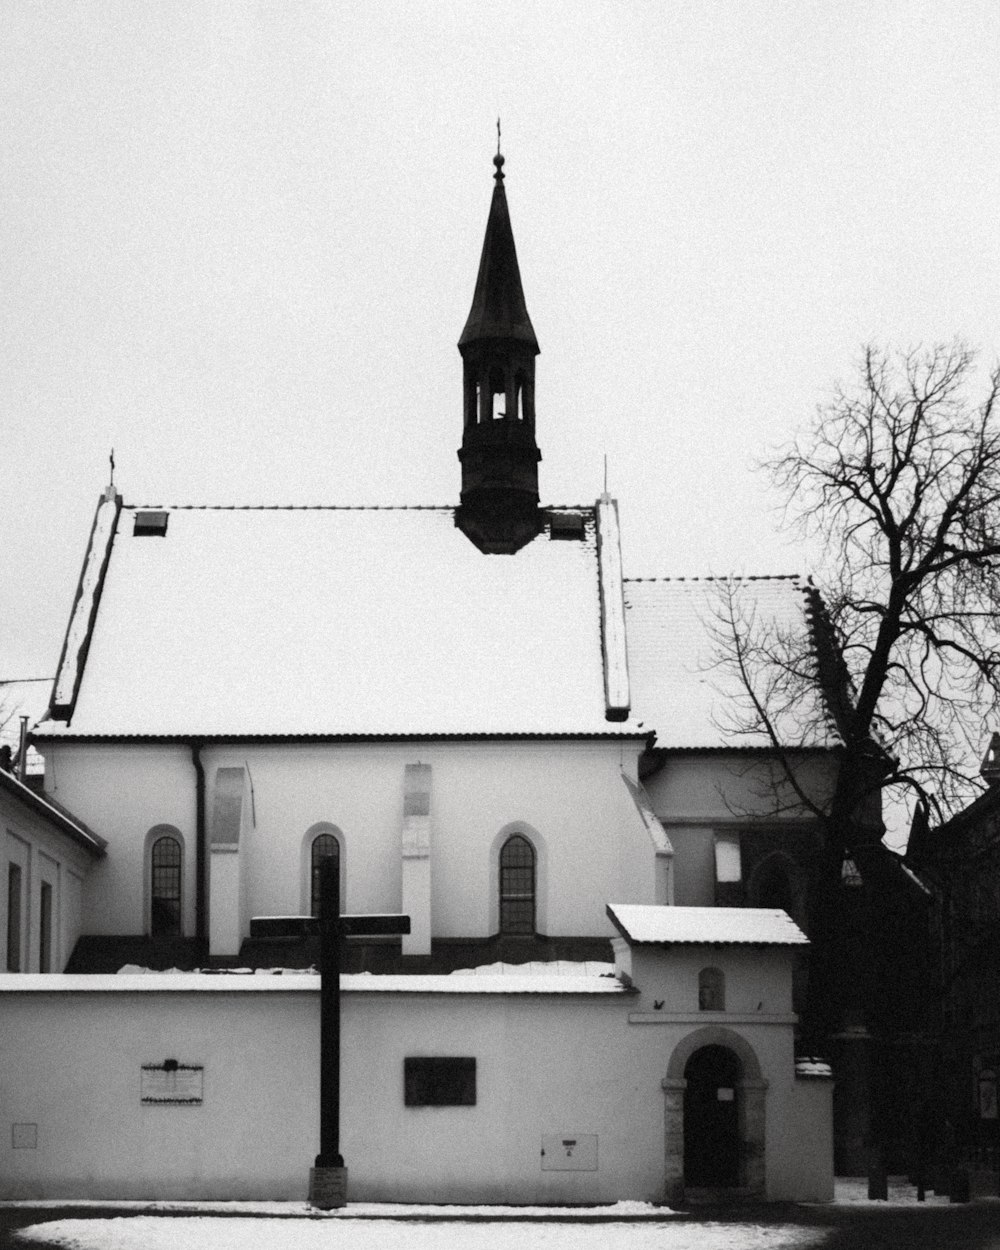 a black and white photo of a church in the snow